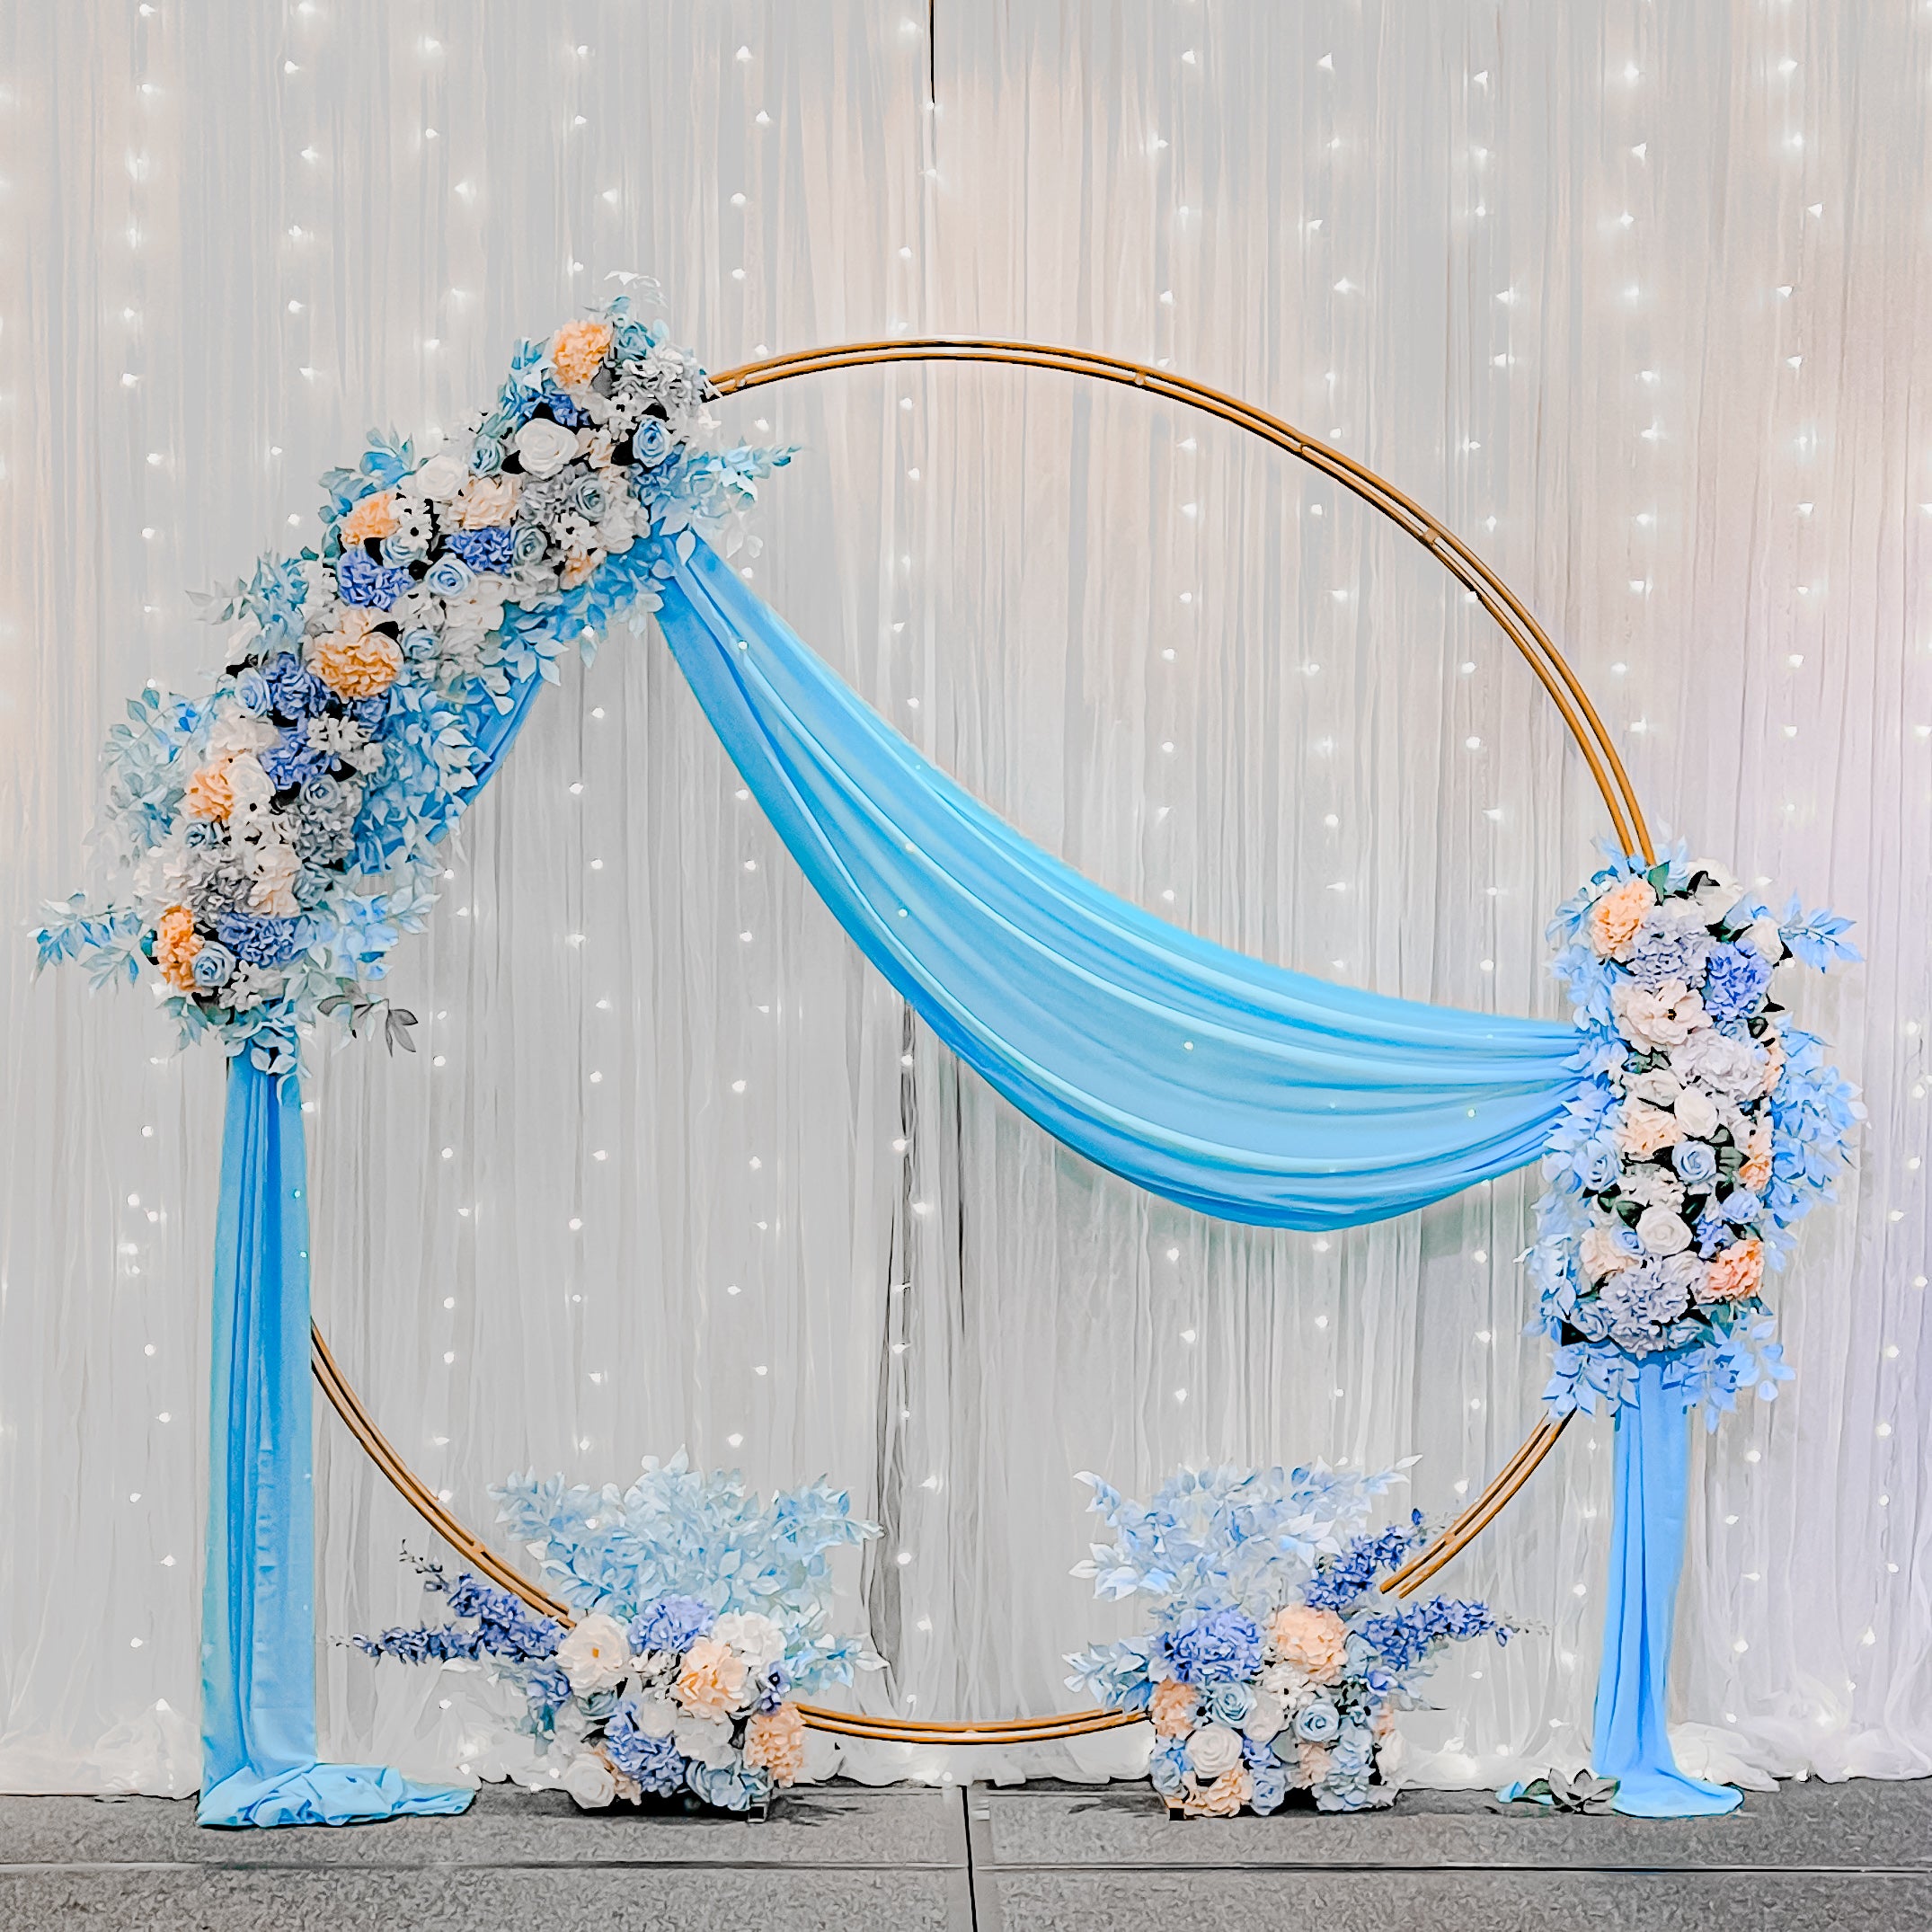 Wedding Stage Decor in Singapore - Blue White Peach Theme Floral Arch with Fairylight Backdrop suitable for Indoor/Outdoor (Venue: Four Season Hotel Singapore )